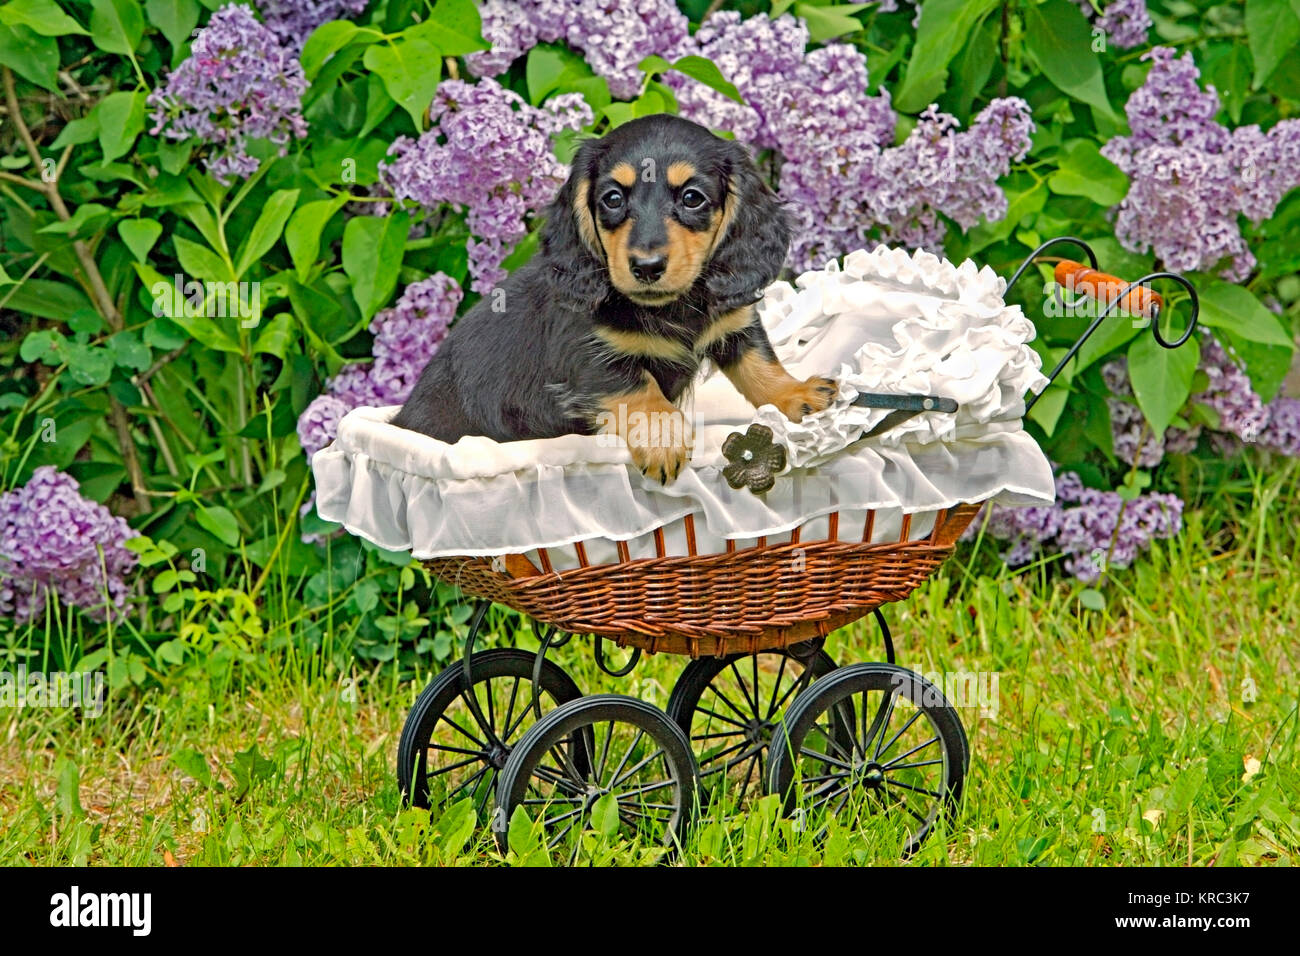 Dachshund puppy 9 weeks old in baby carriage in front of lilac bushes Stock Photo